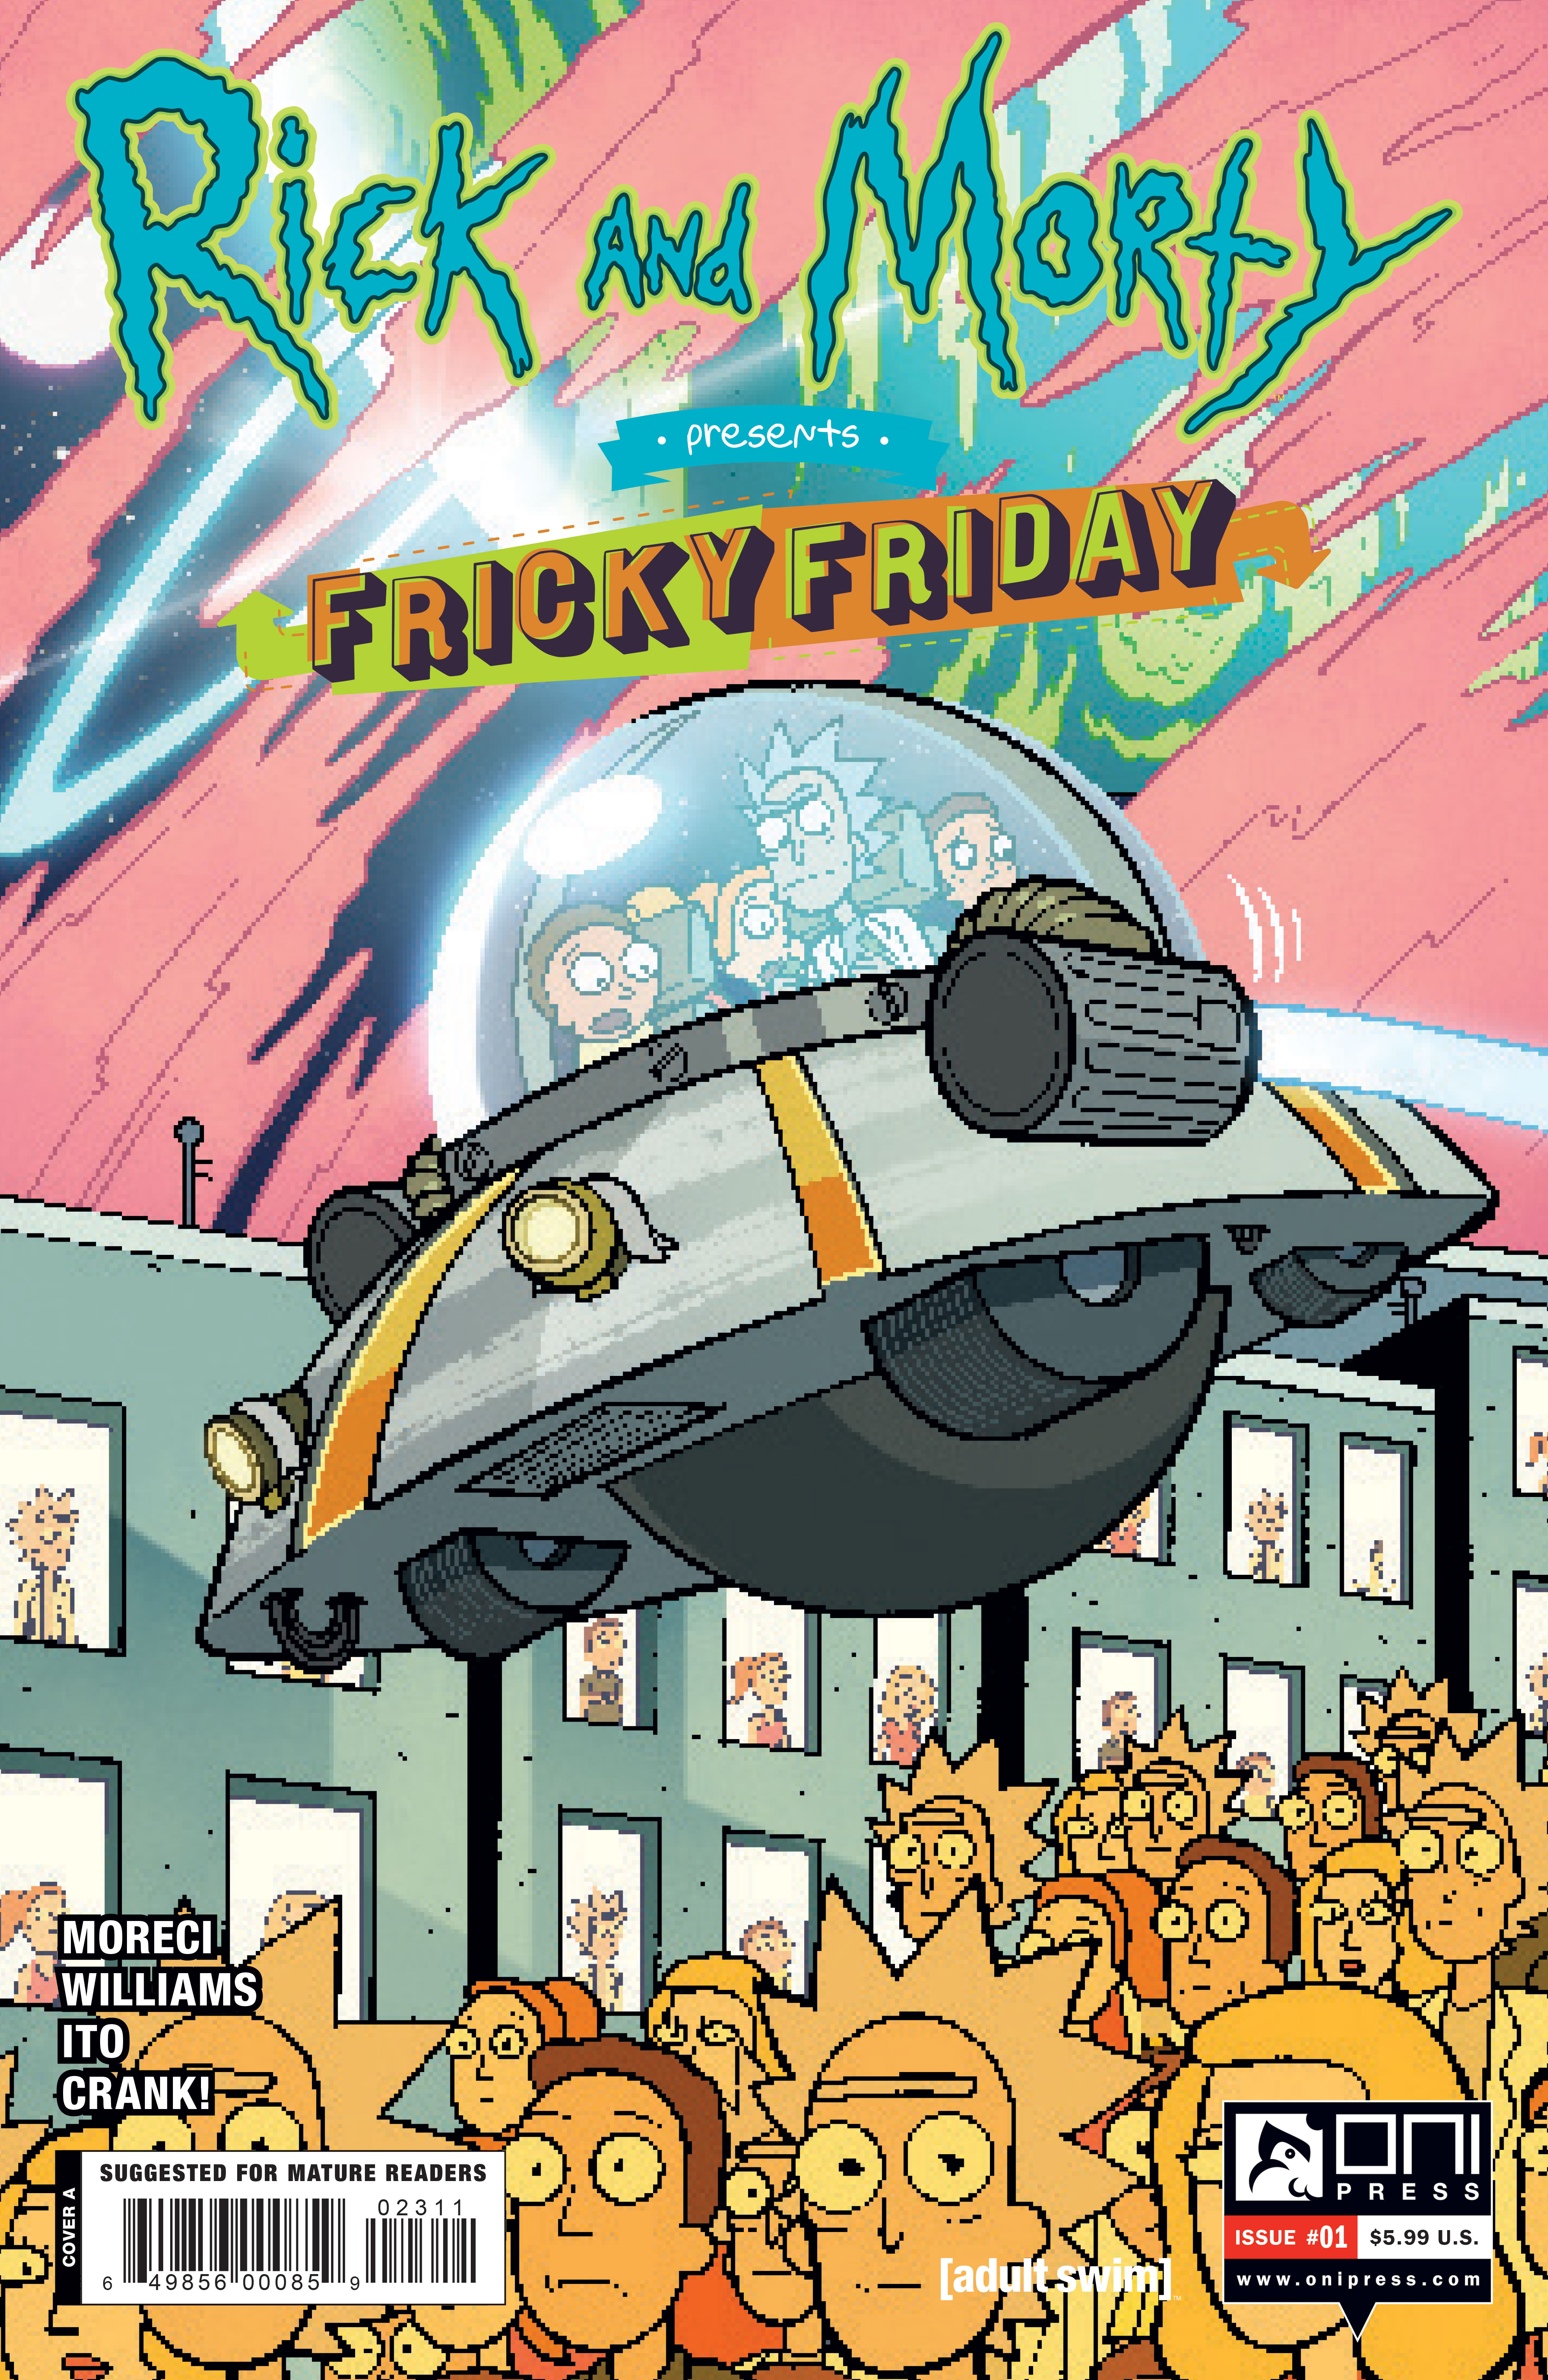 Rick and Morty Presents Fricky Friday #1 Cover A Williams (Mature)